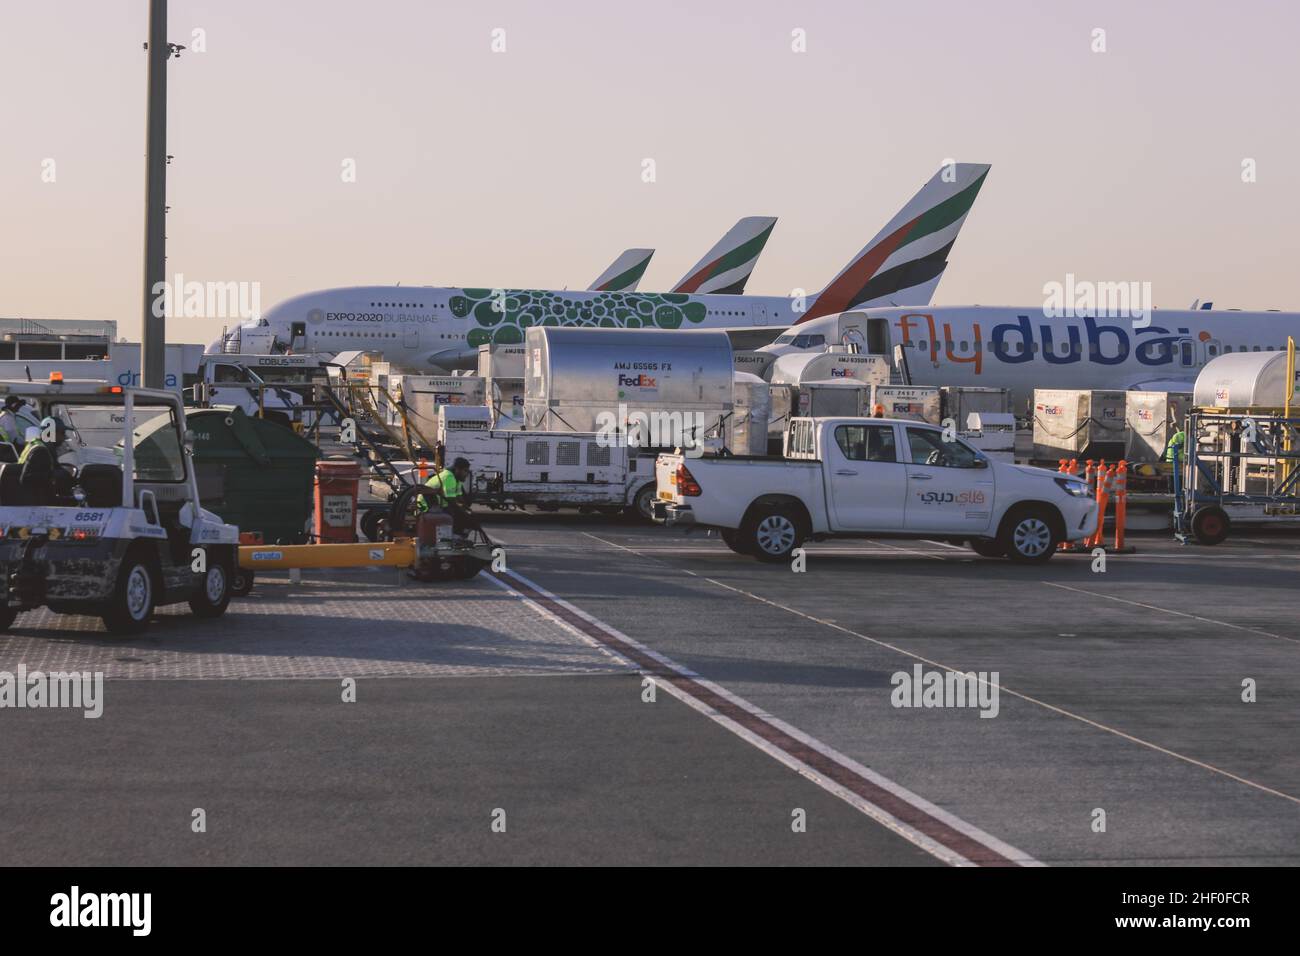 Dubai, United Arab Emirates - June 10, 2021: View to the Service Cars and Aircraft in the International Airport Stock Photo